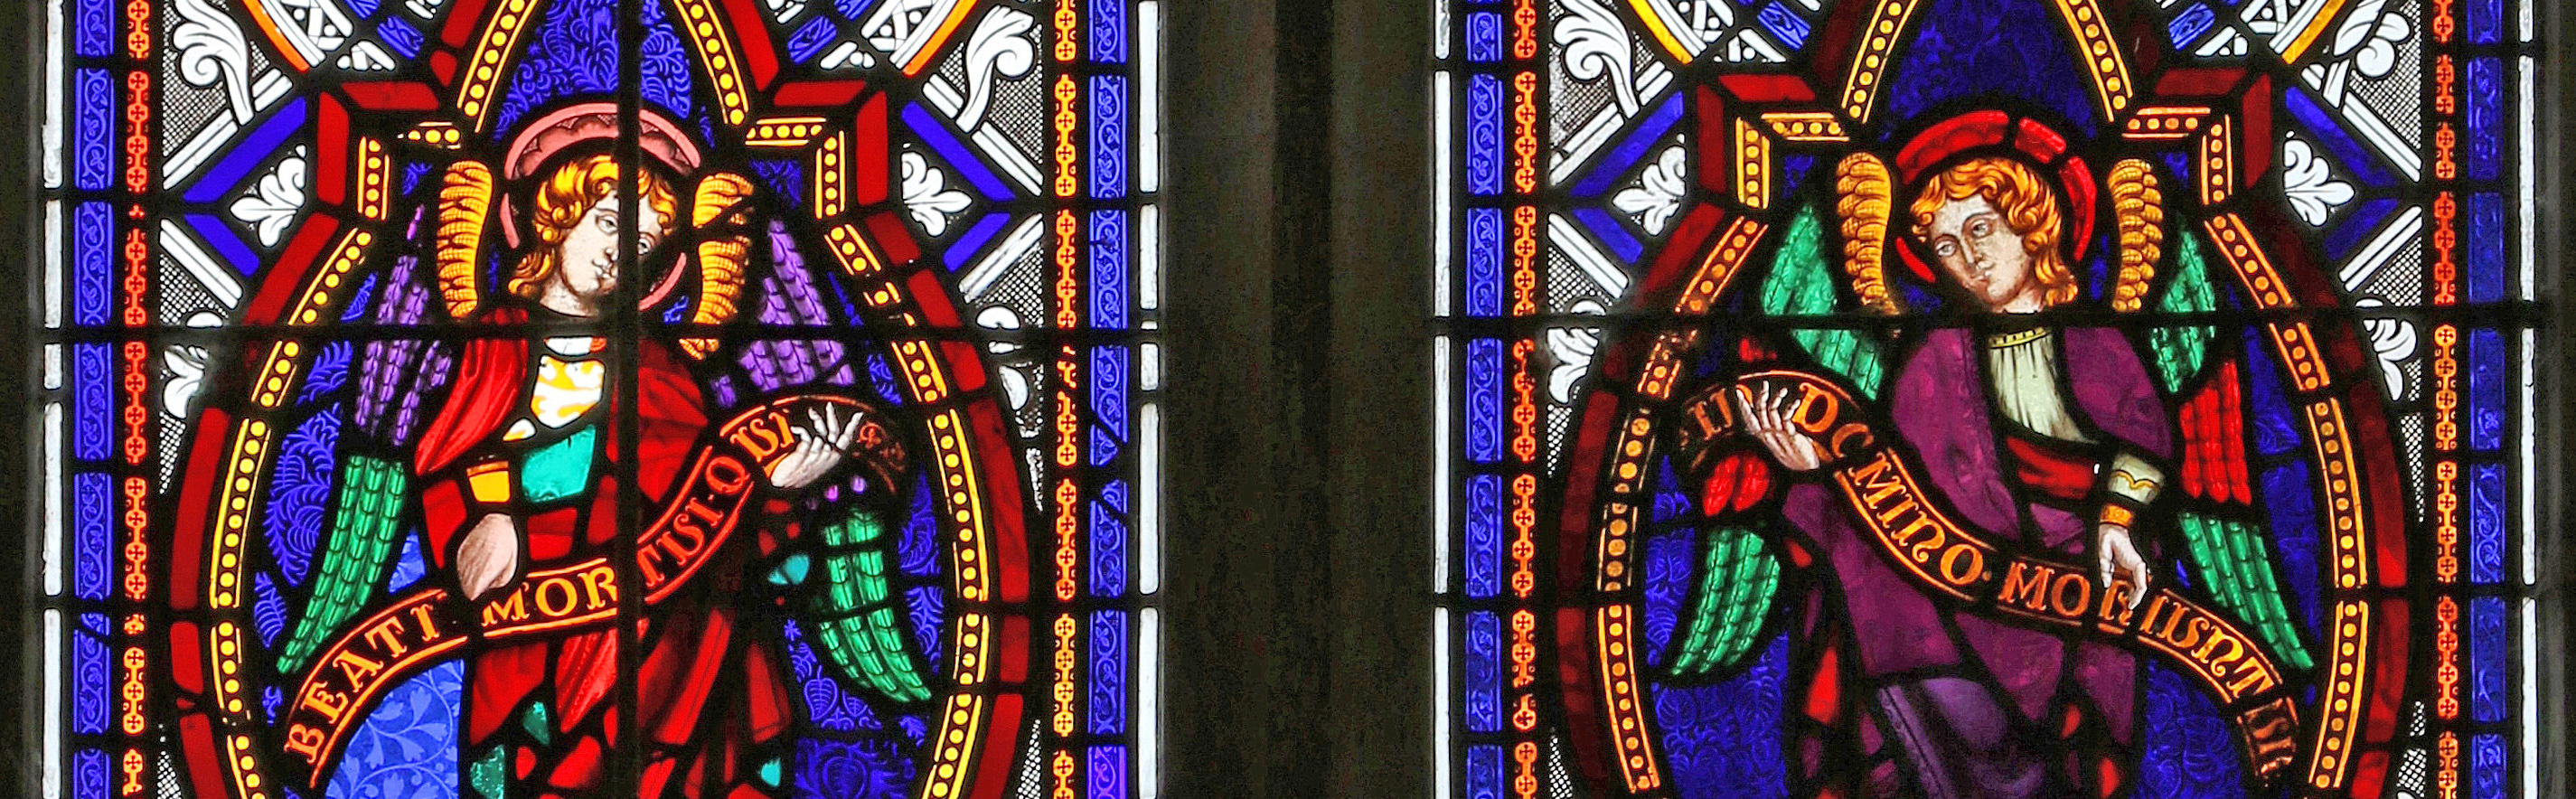 Details from East Window of Dunston St Remigius